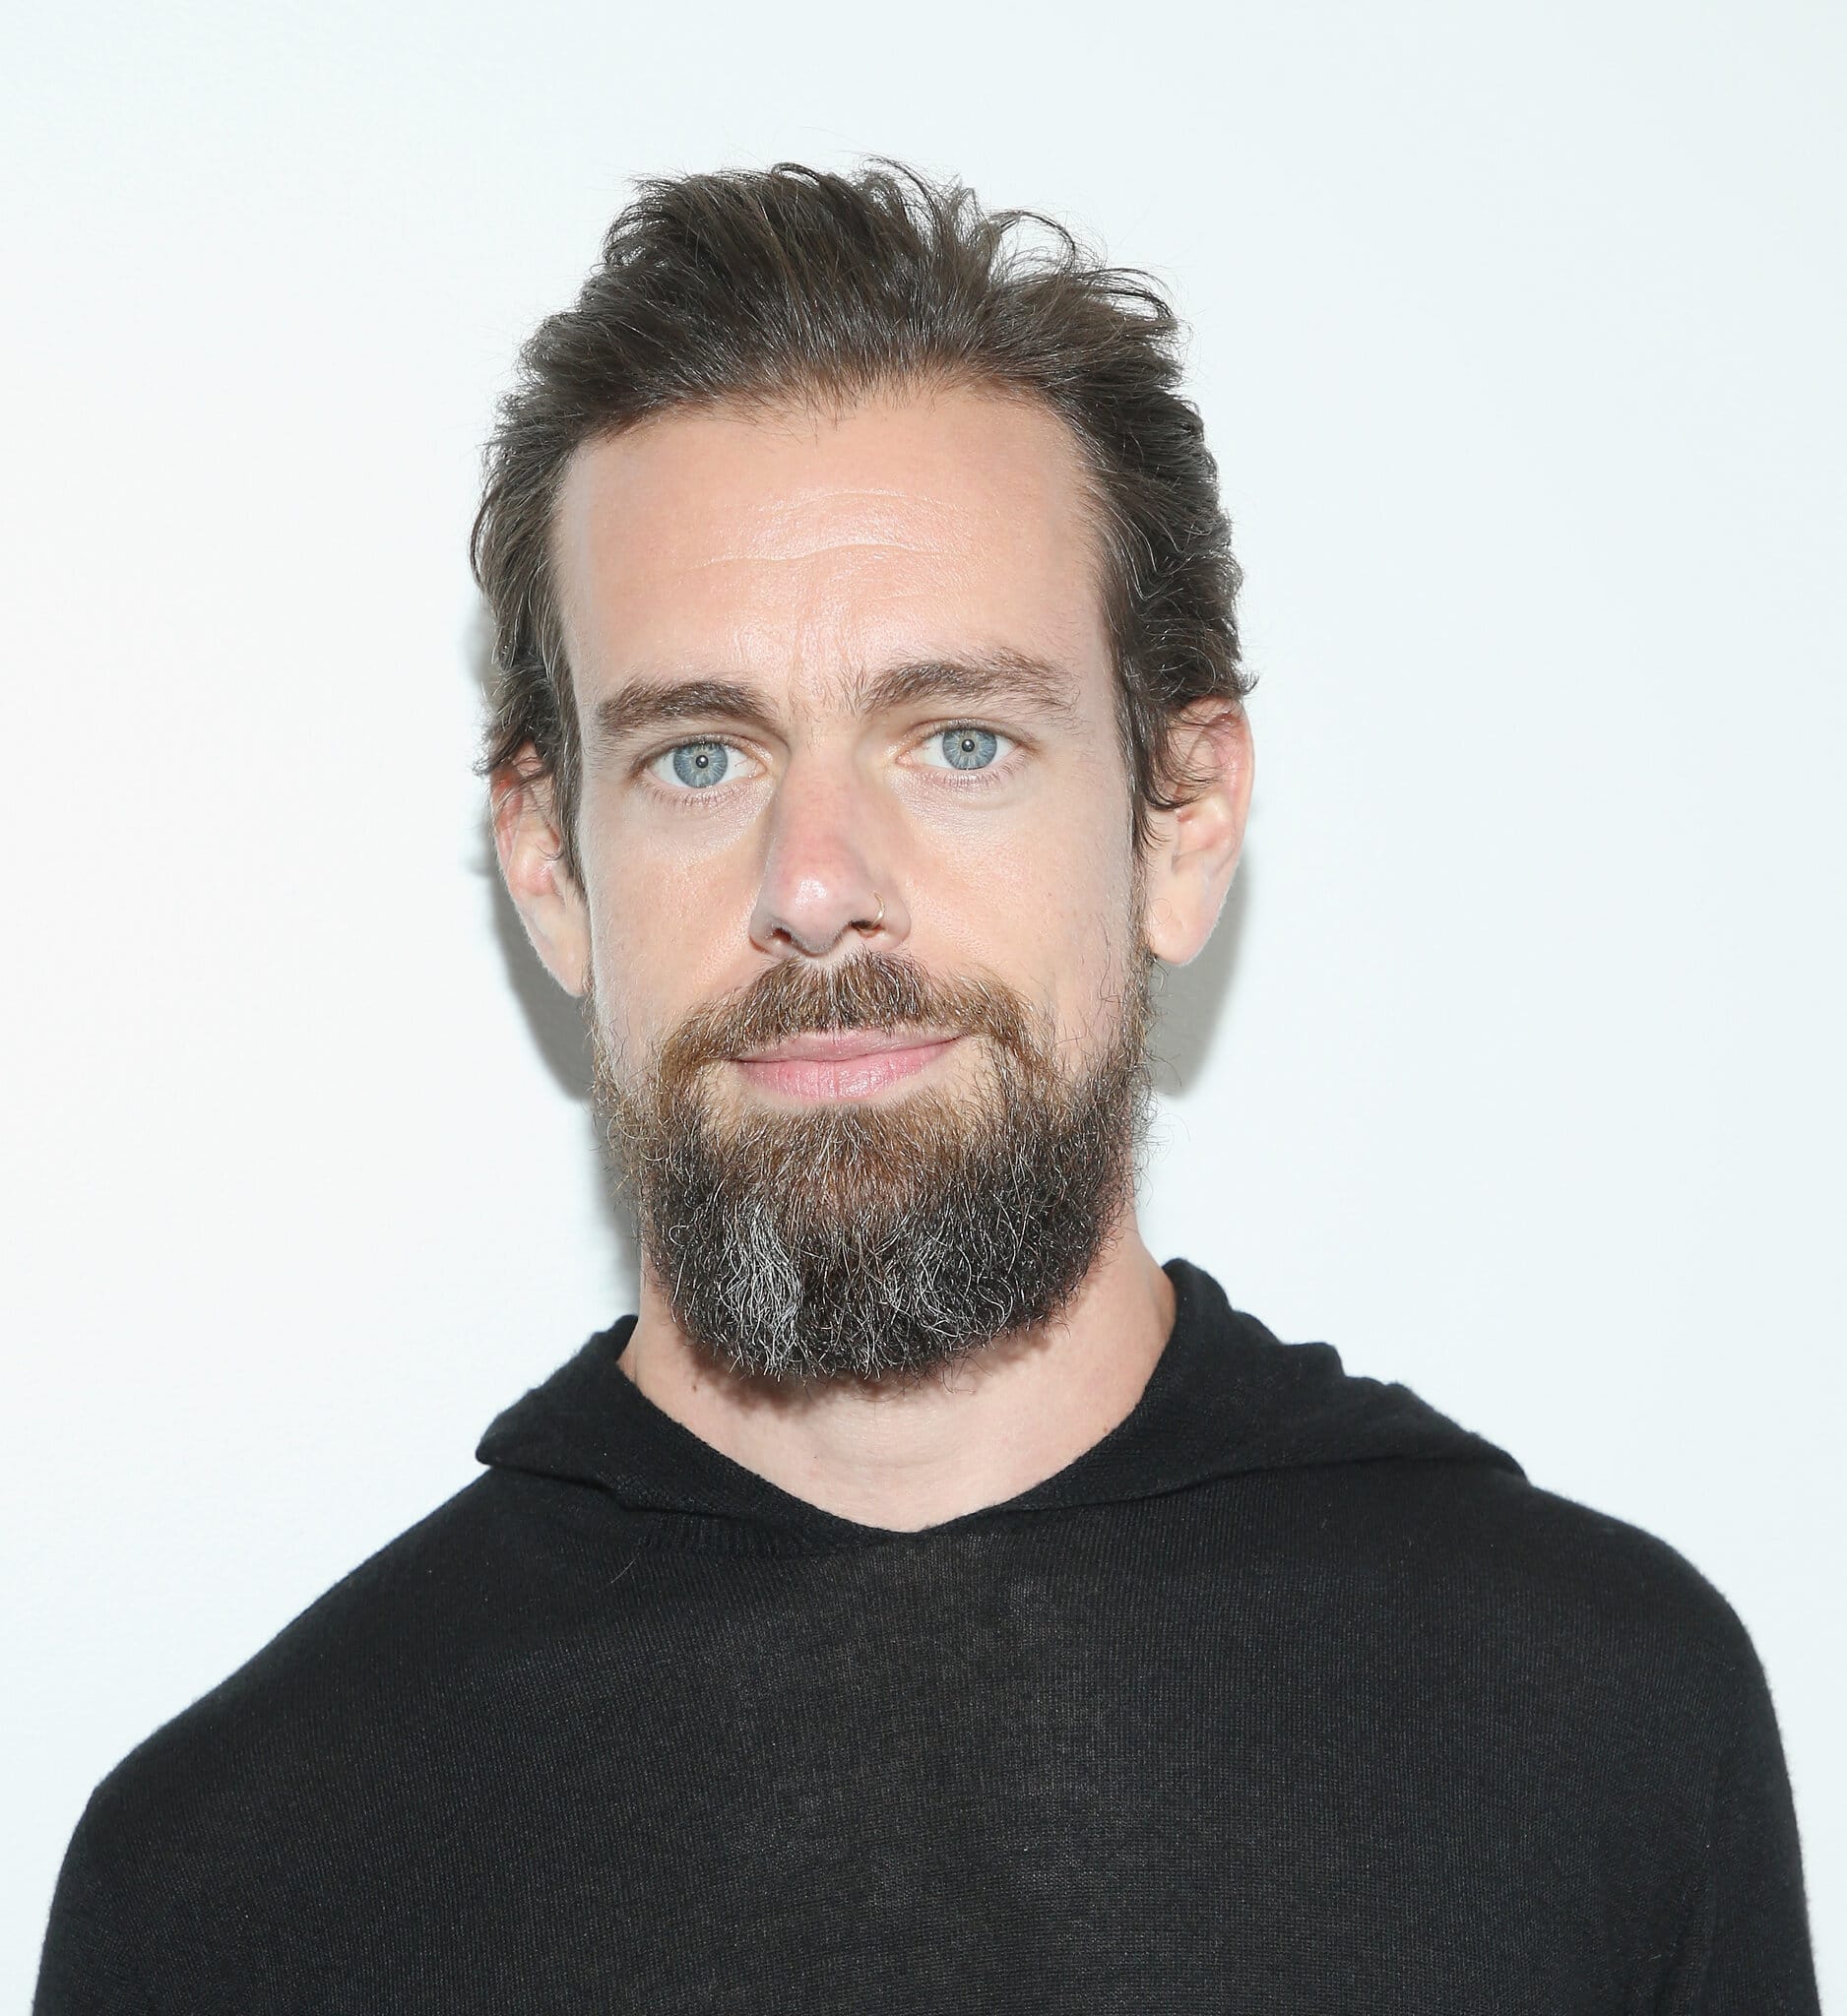 Best quotes by Jack Dorsey